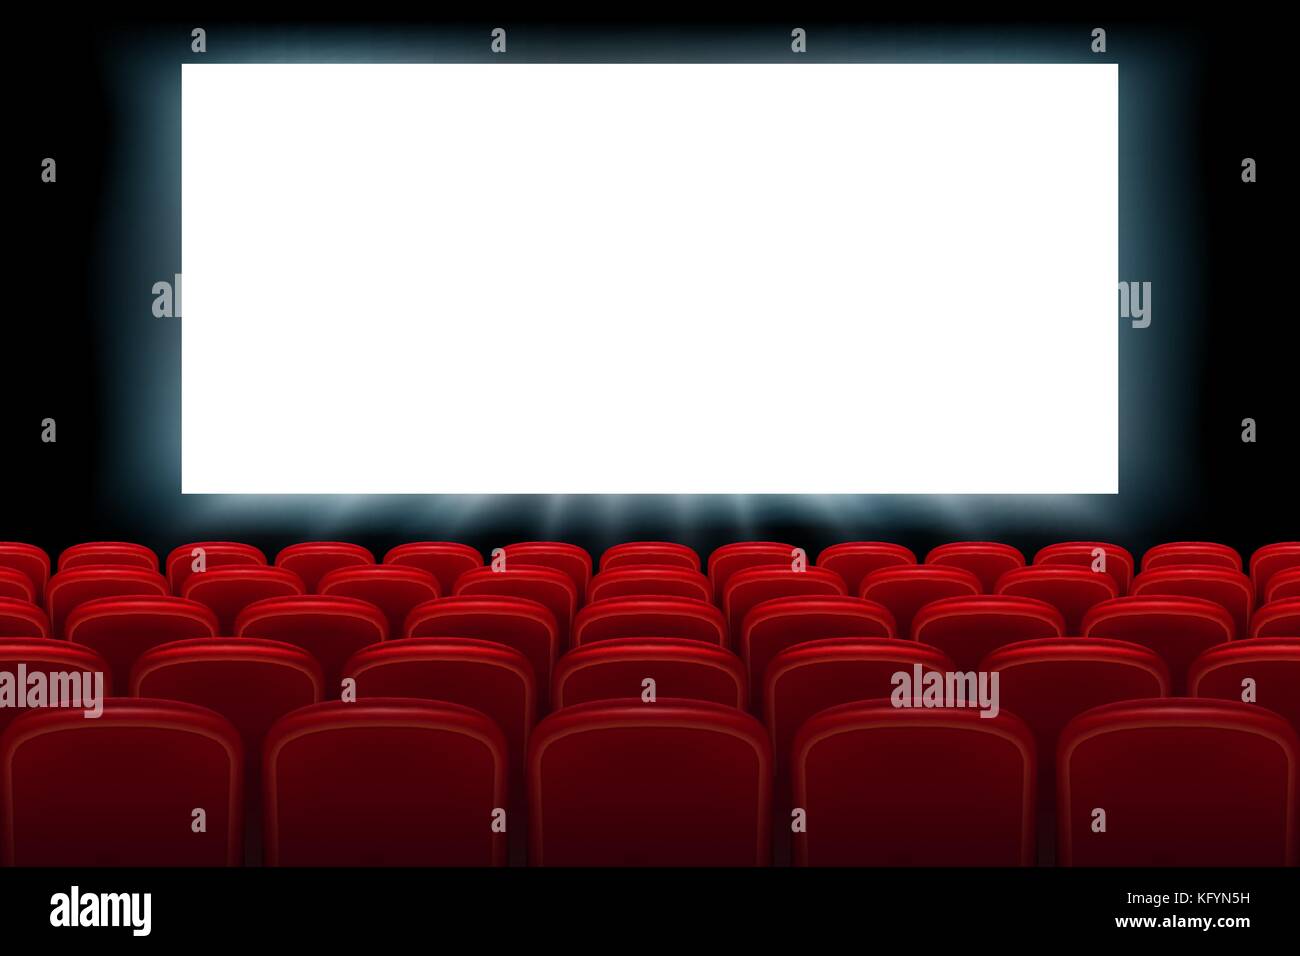 Realistic cinema hall interior with red seats. Cinema movie premiere poster design with empty white screen. Vector illustration. Stock Vector